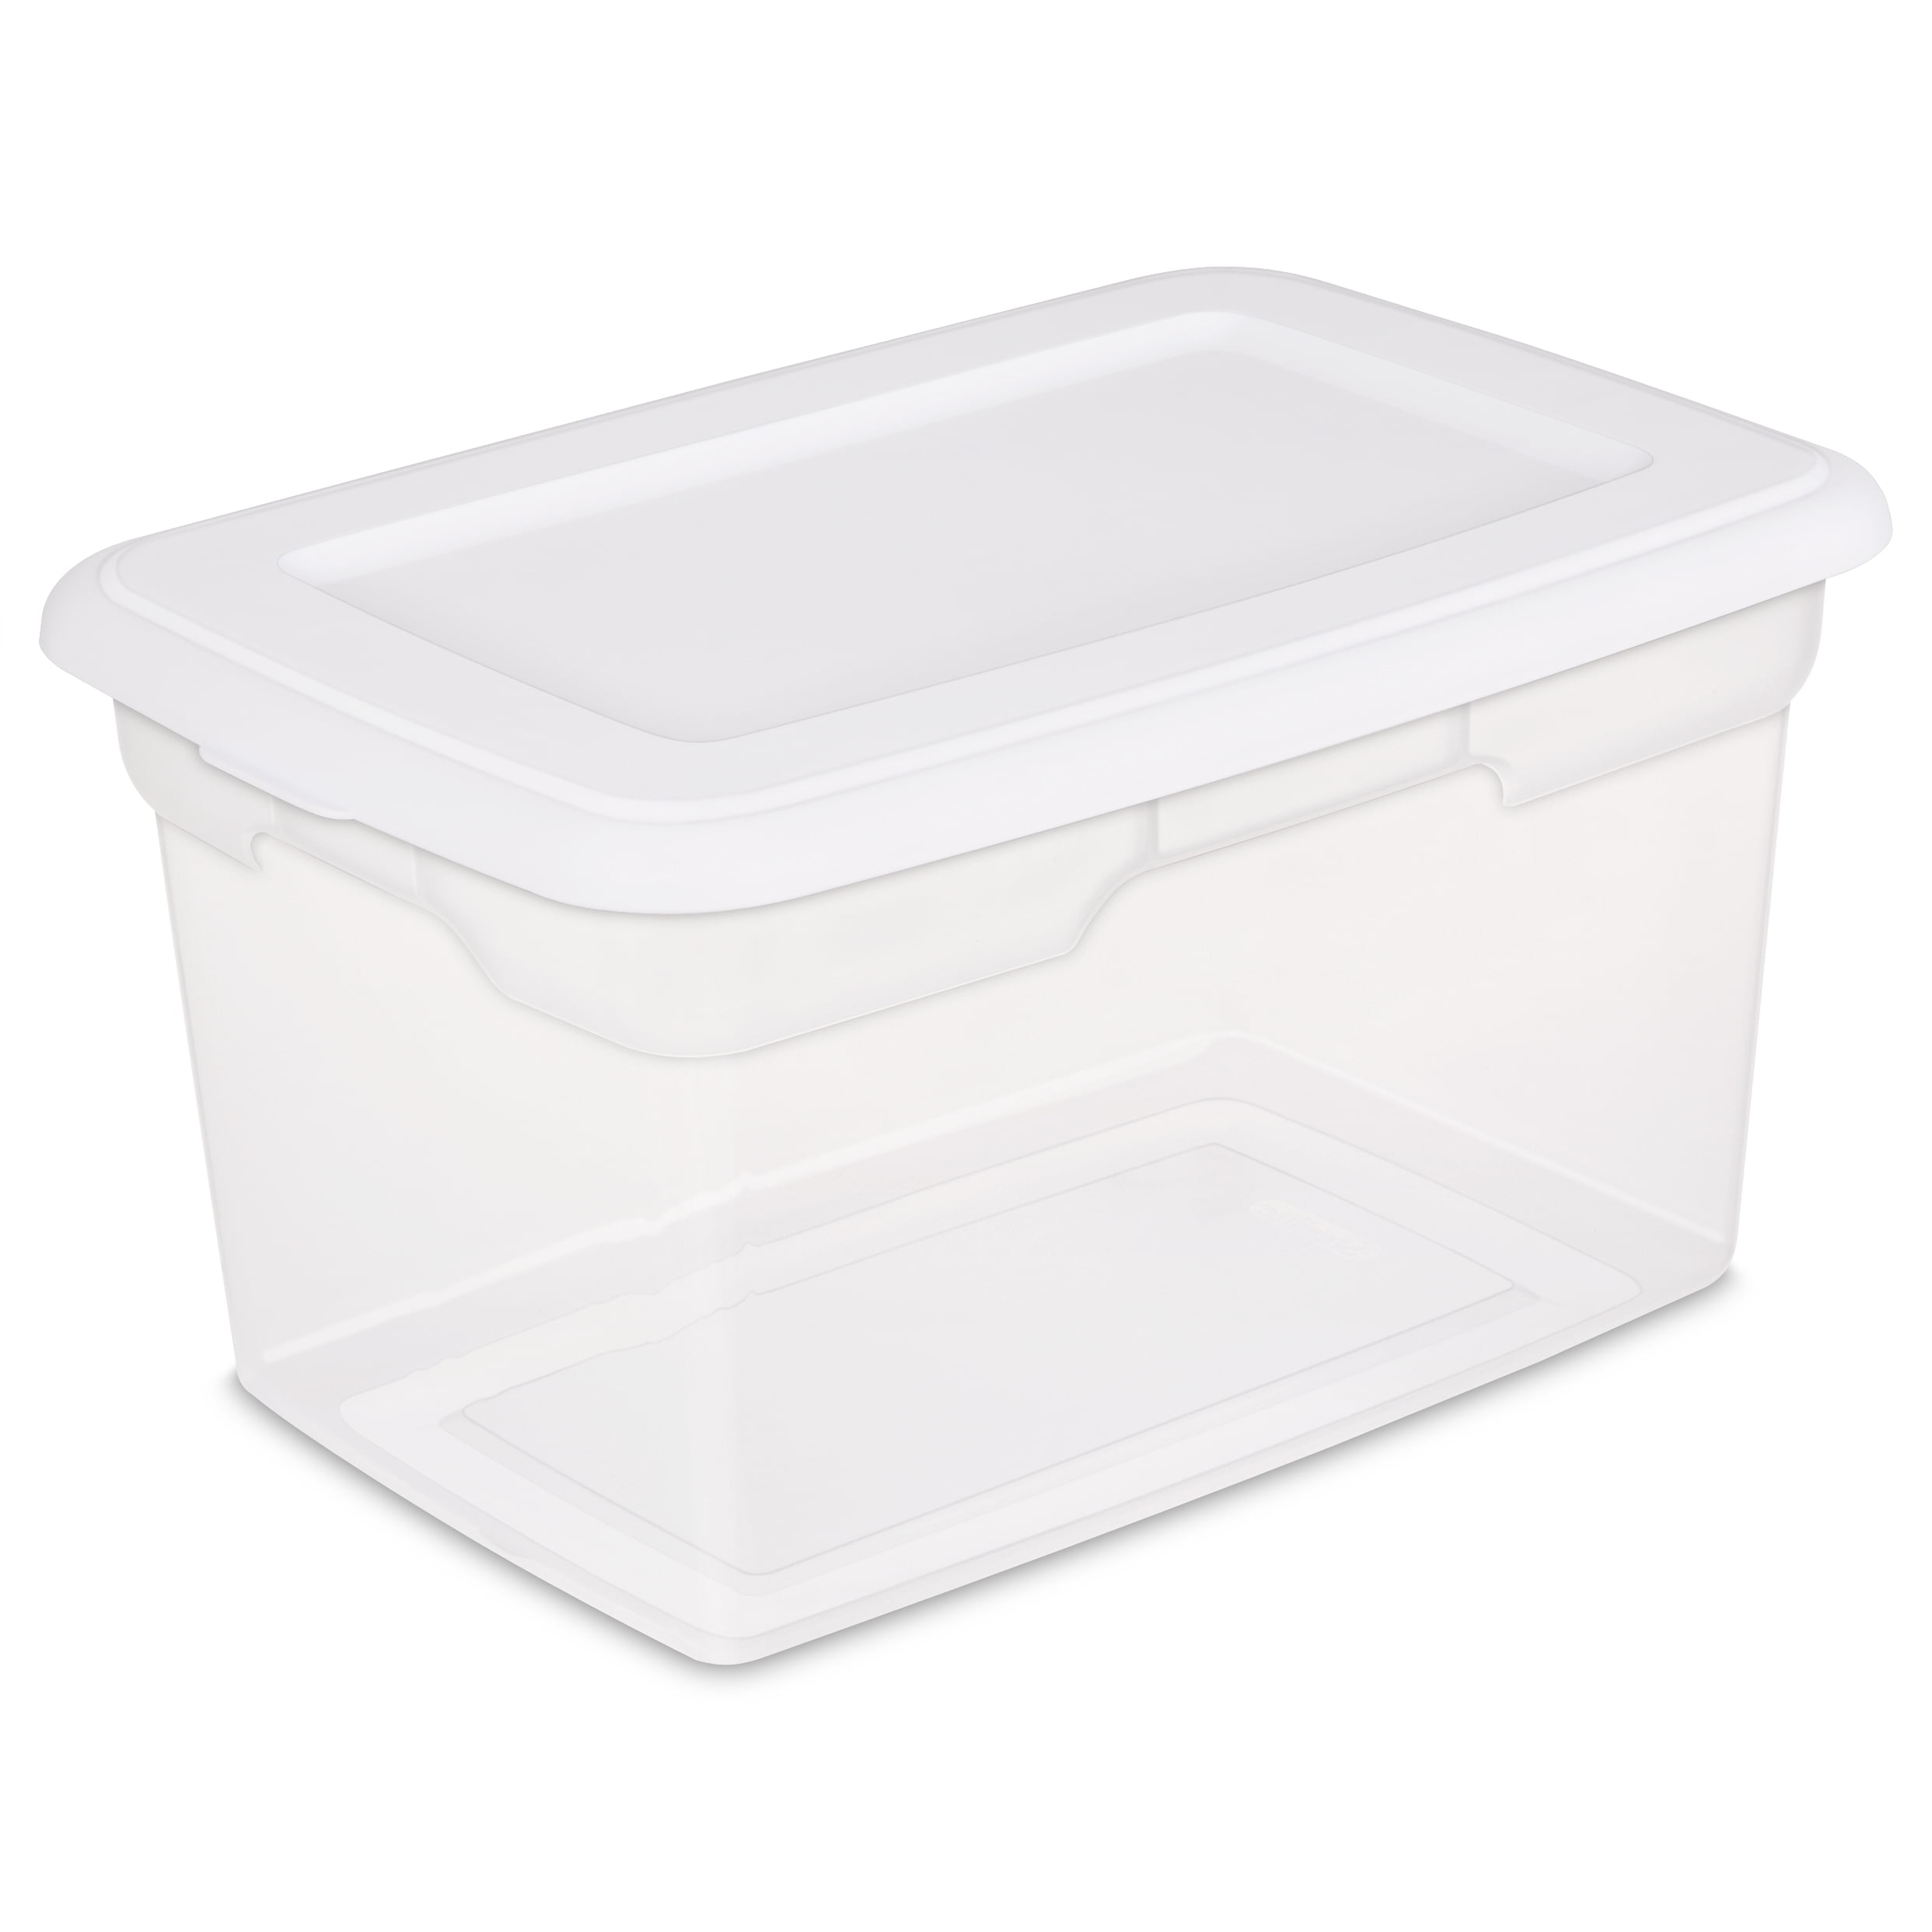 12" Plastic Tool Box Handle Clear Lid Multi Storage Container Bit Compartments 